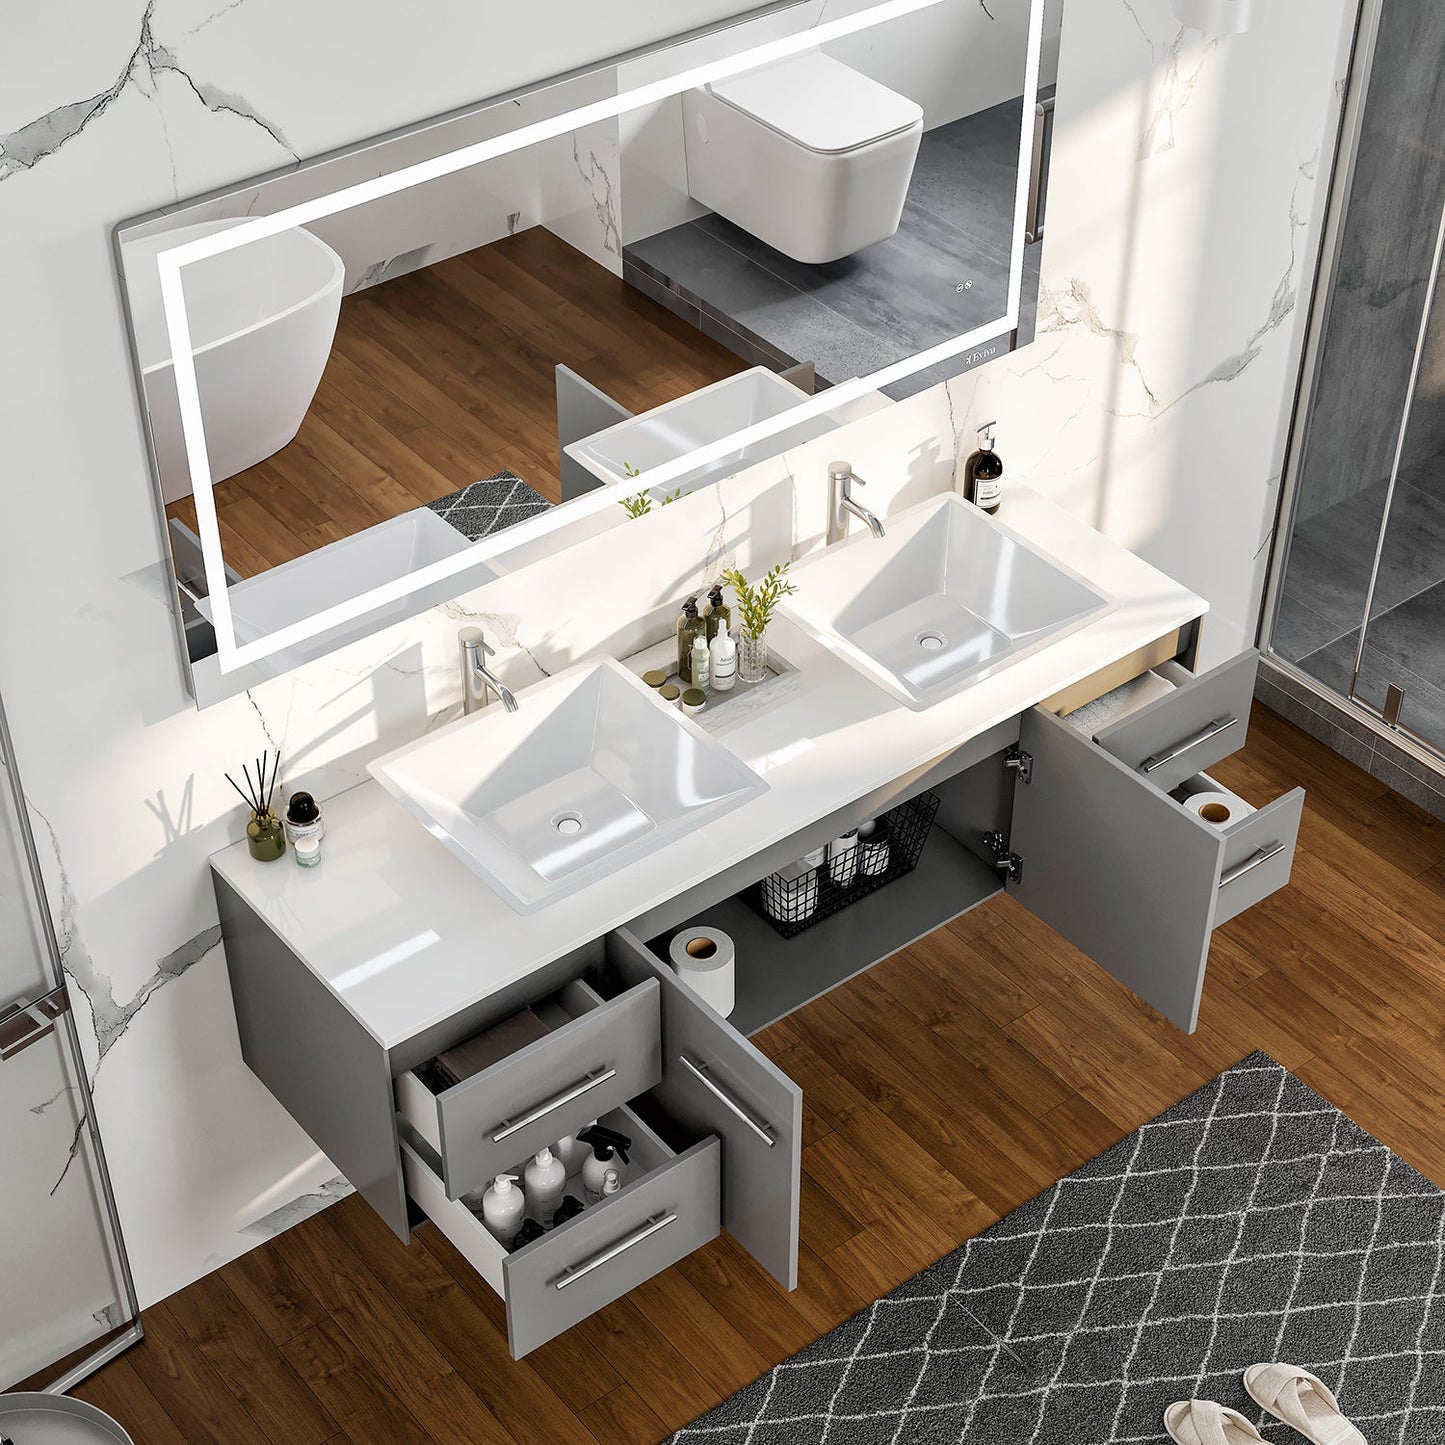 Wave 60"W x 22"D Gray Double Sink Bathroom Vanity with White Quartz Countertop and Vessel Porcelain Sink